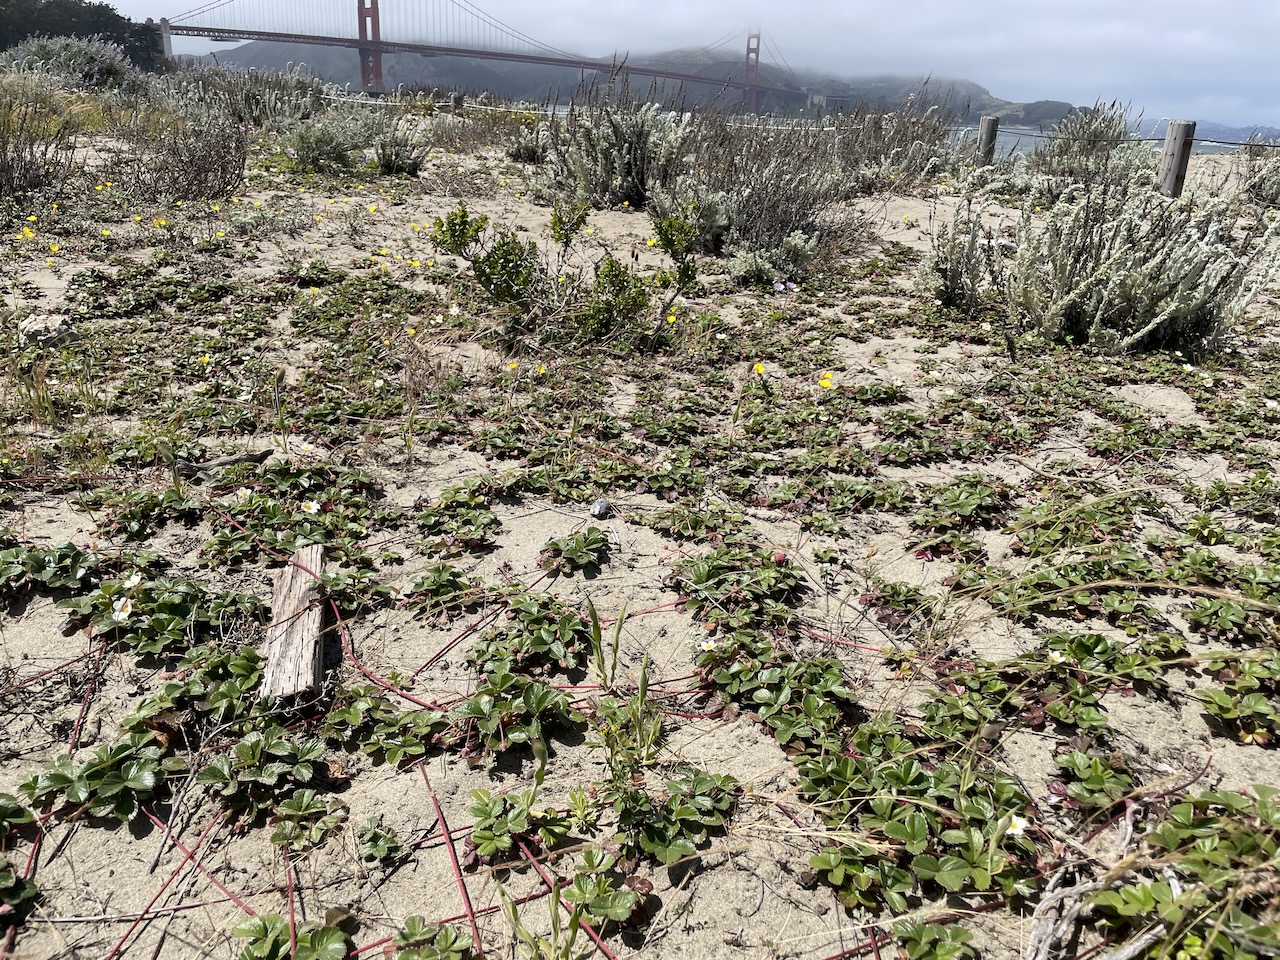 Coastal strawberries spread over the dunes, in the background the Golden Gate bridge partly shrouded with fog